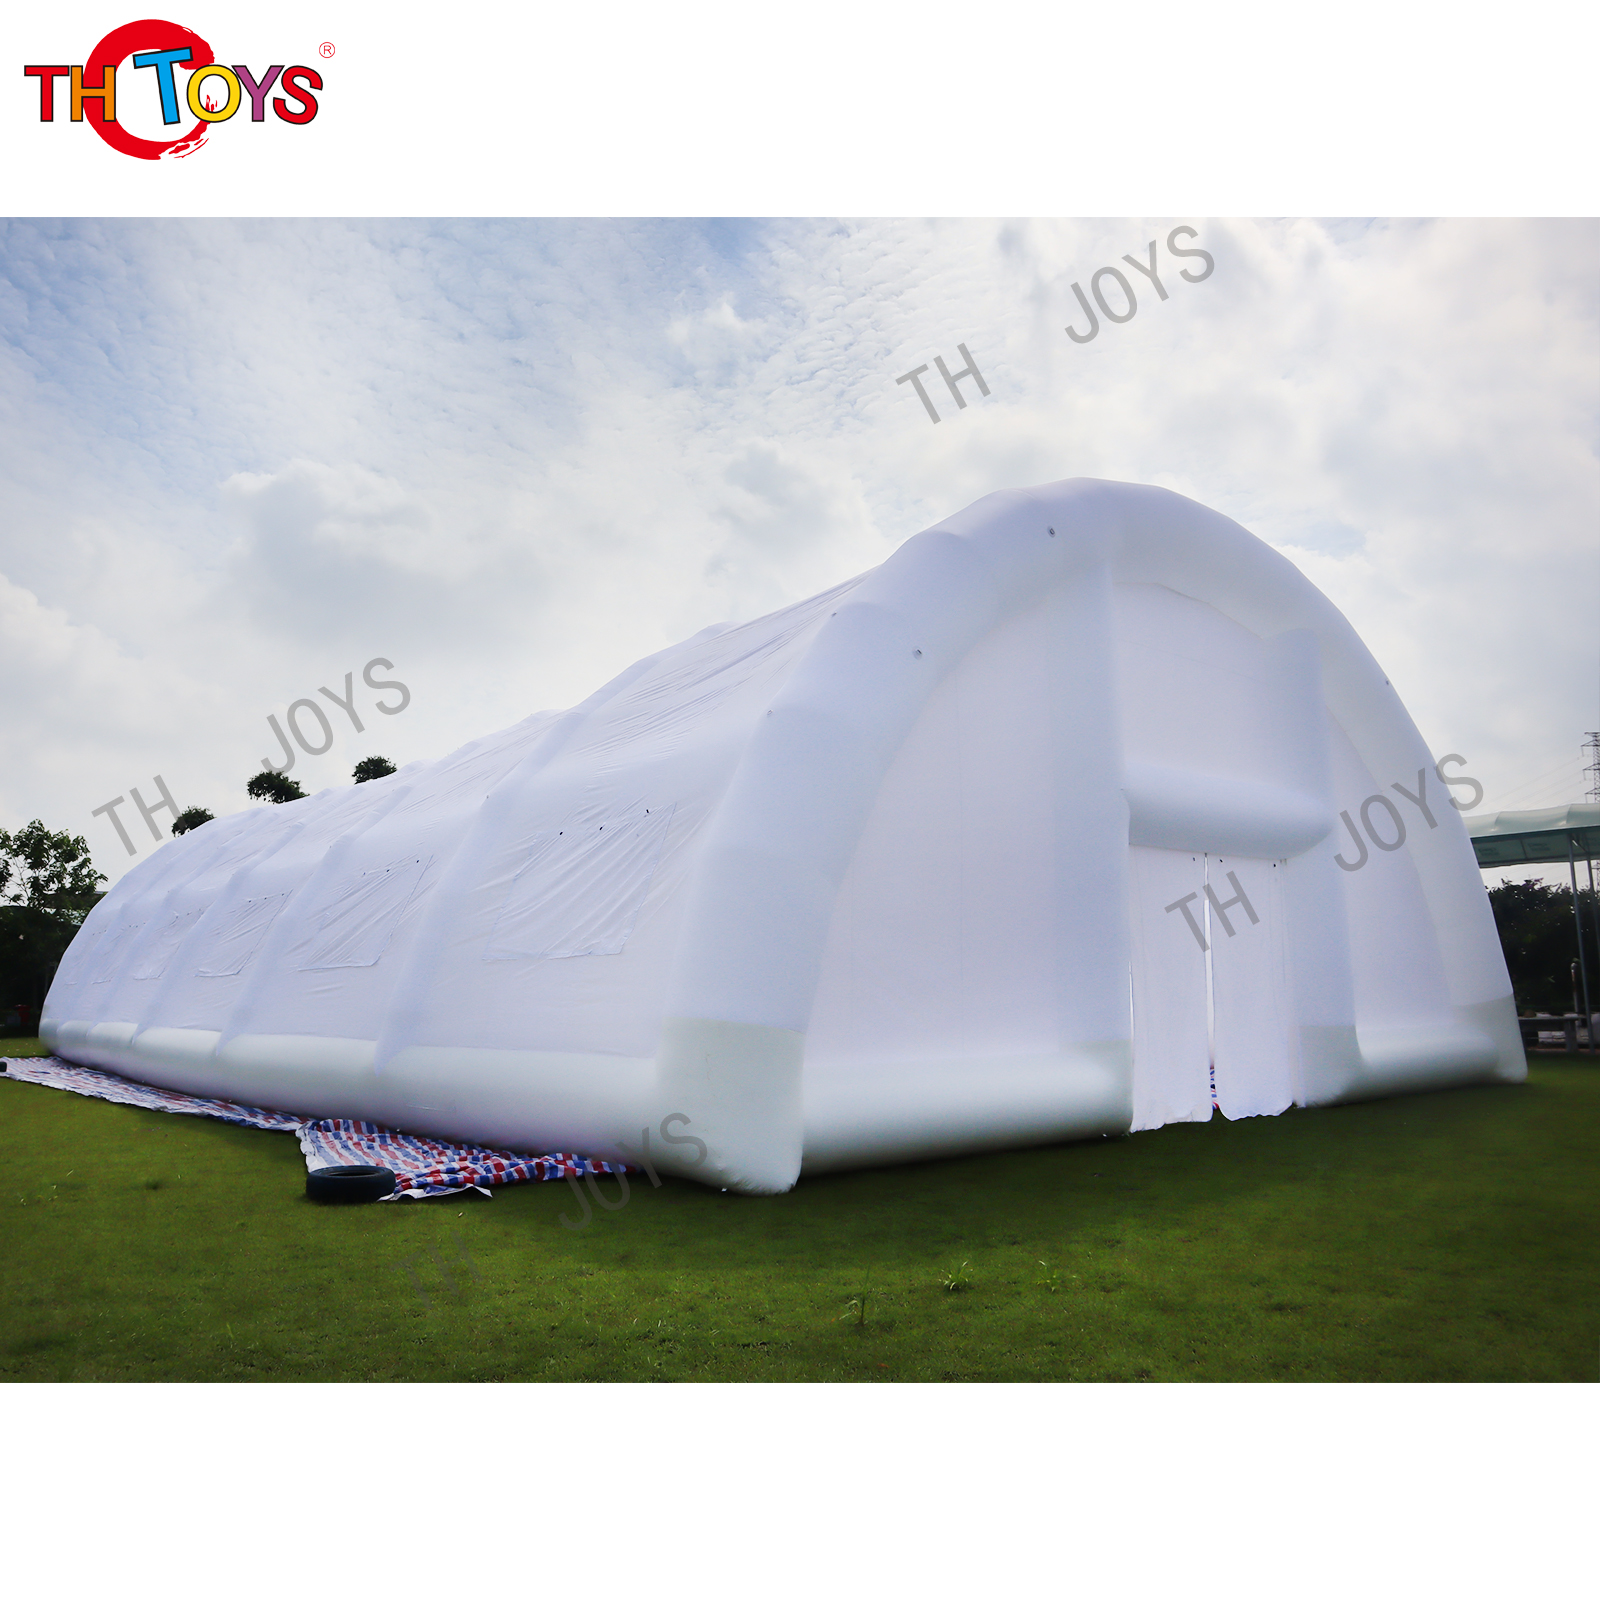 Inflatable spider tents07